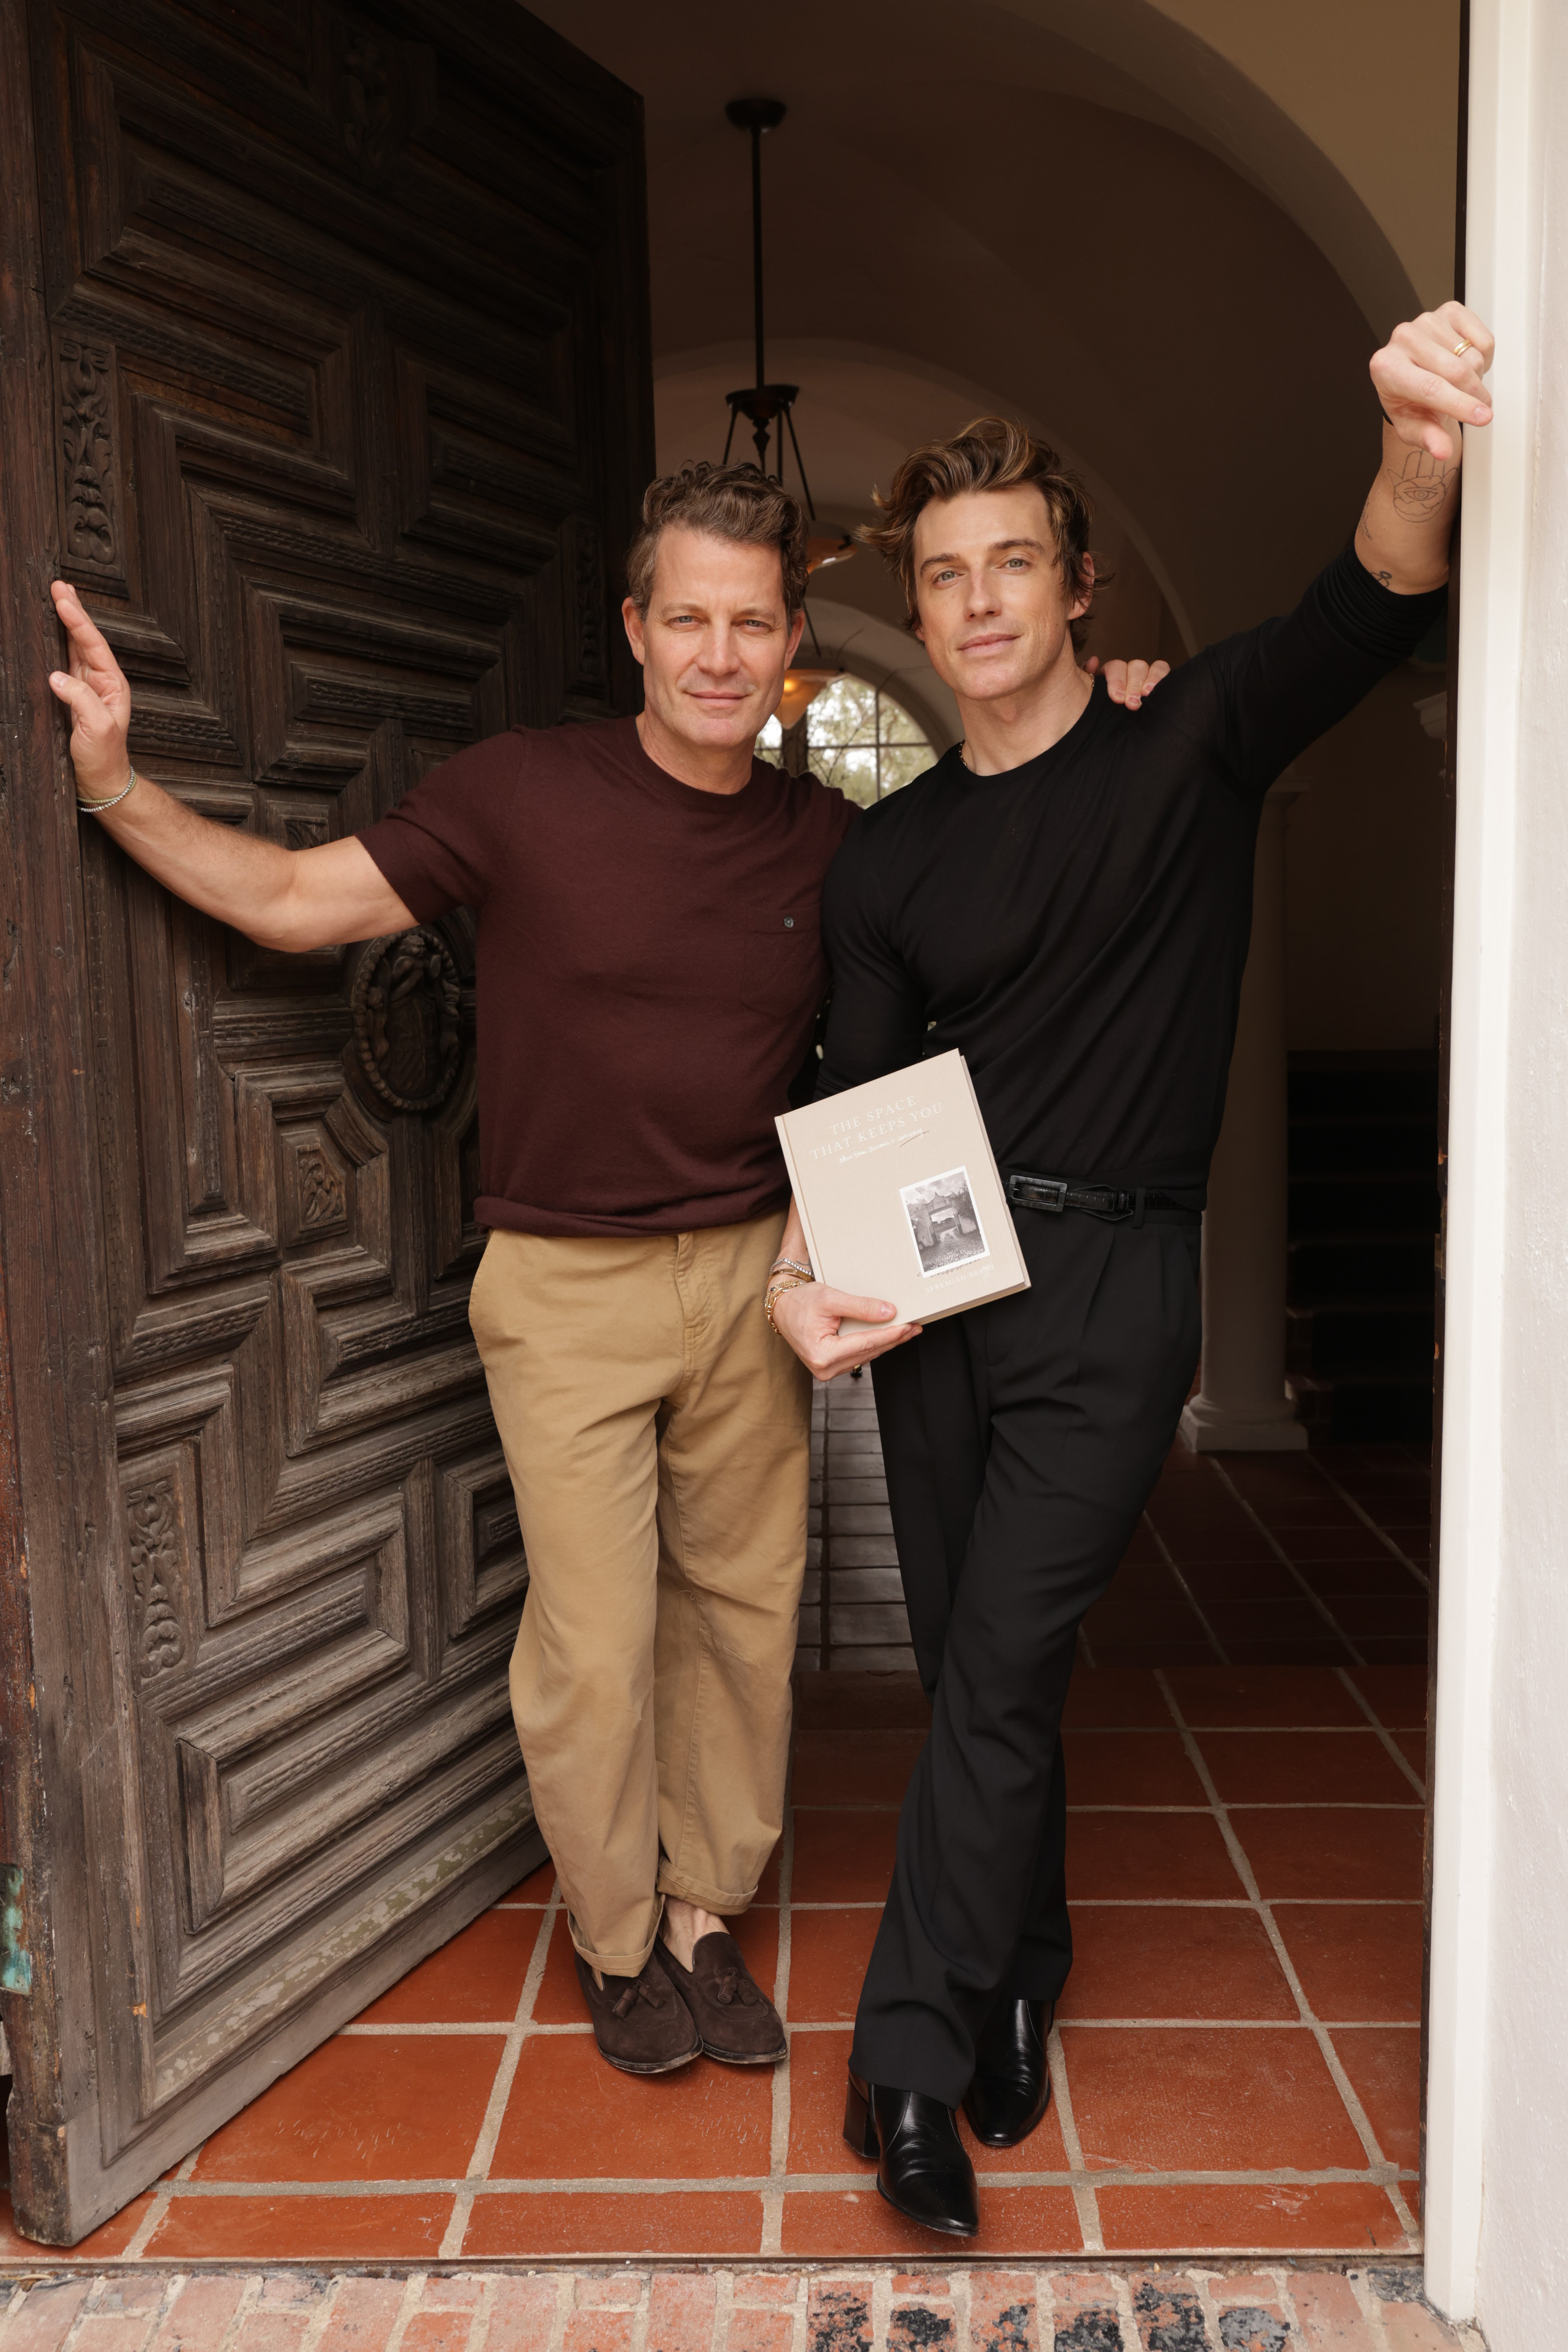 Nate Berkus (L) and Jeremiah Brent are seen at Jeremiah Brent’s Book The Space That Keeps You”Launch Party on March 2, 2024, in Montecito, California